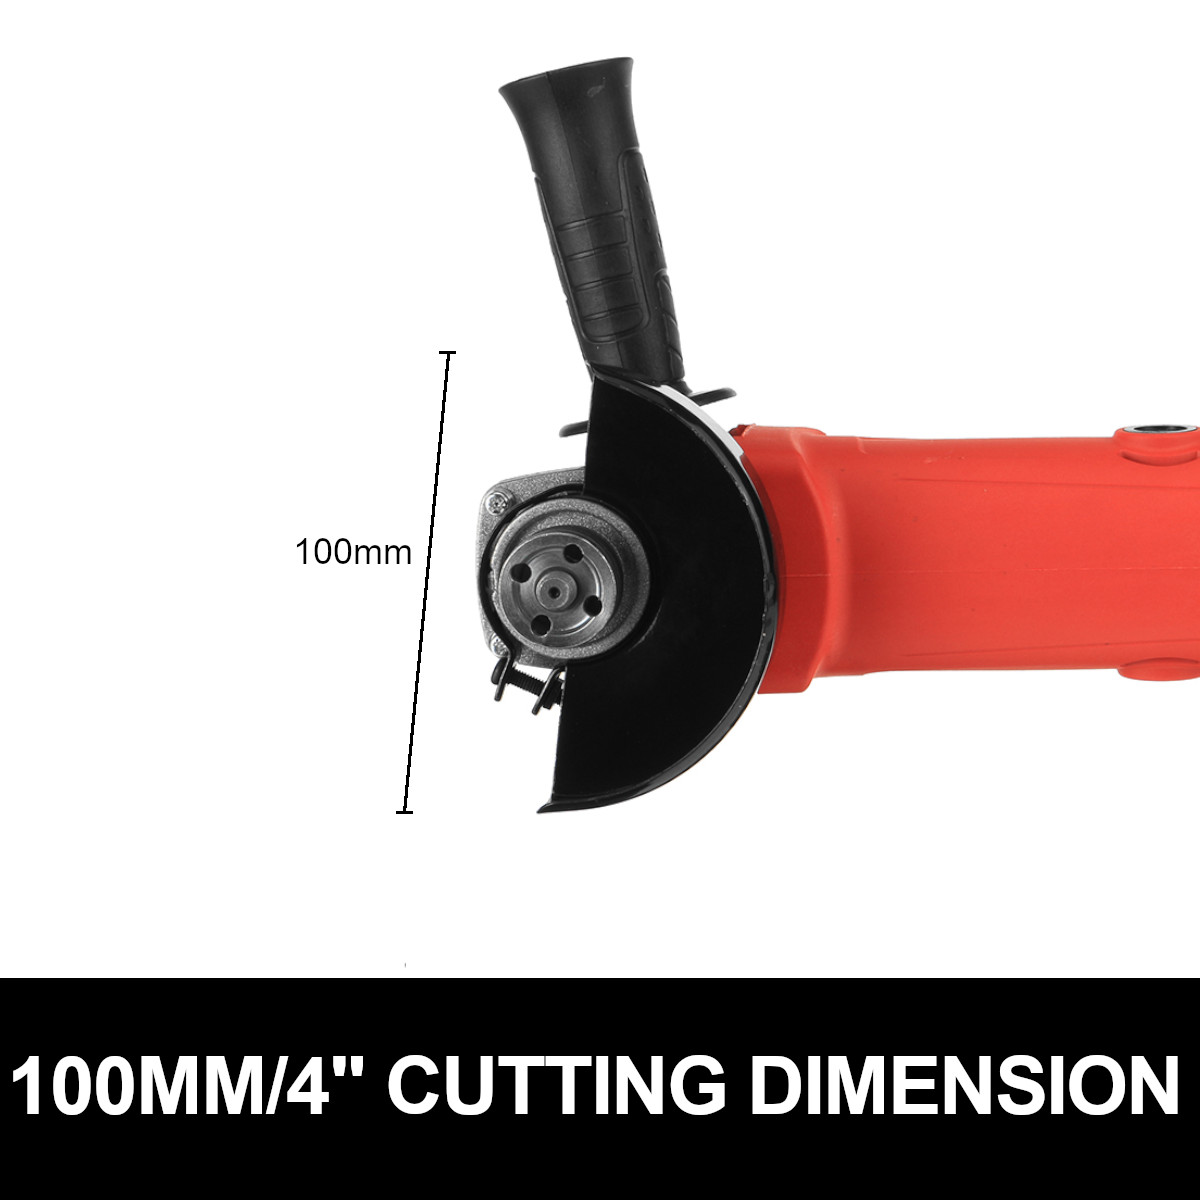 850W-100mm-11000rpm-Electric-Angle-Grinder-Cutting-Machine-Handheld-Polishing-Grinding-Carving-Tool-1736781-6